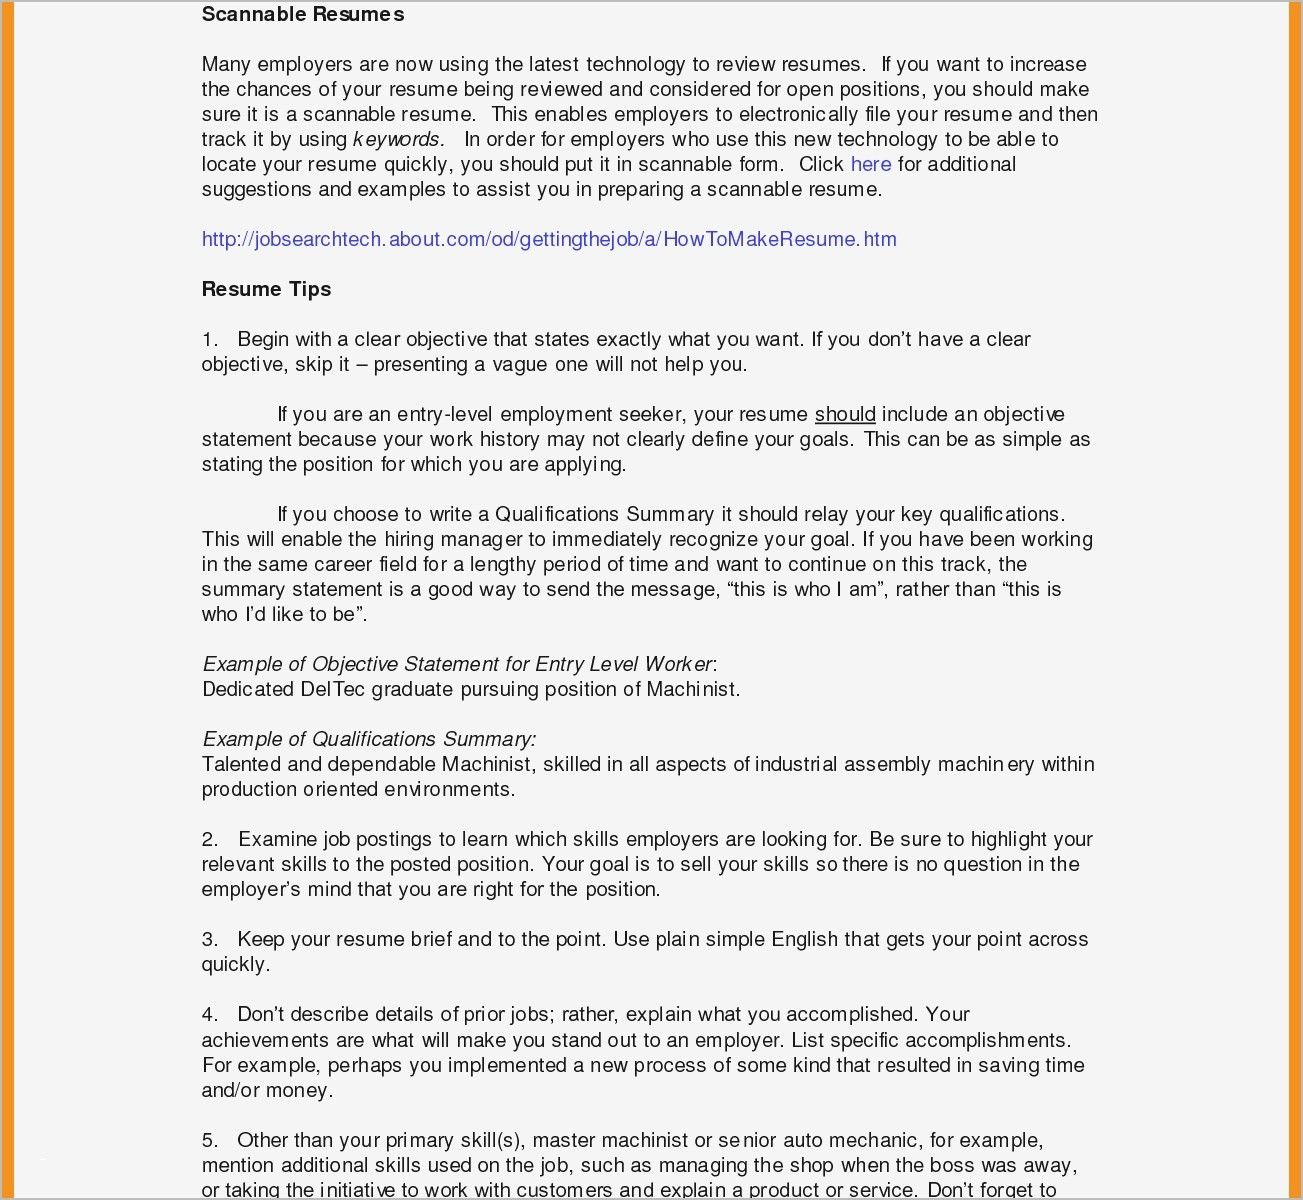 Good Objective For Resume Career Objective Resume Examples Professional Example Objective In Resume For Fresh Graduate Fresh Career Of Career Objective Resume Examples good objective for resume|wikiresume.com